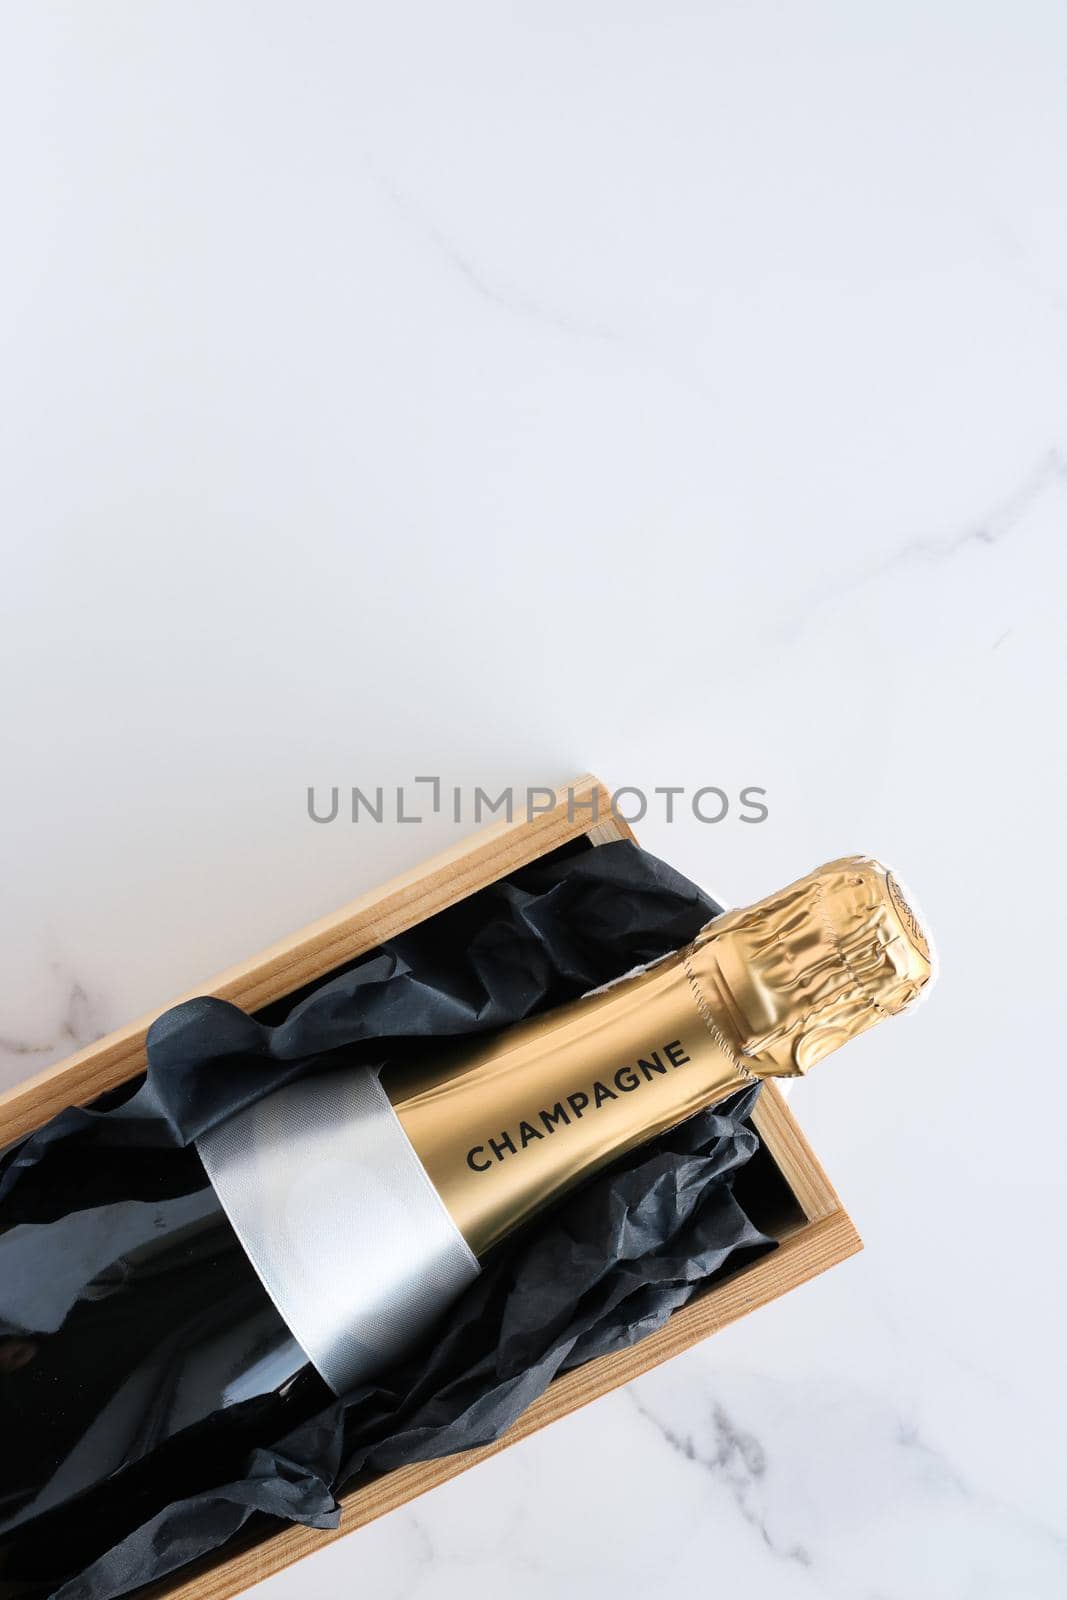 Wedding celebration, lifestyle and luxury present concept - A champagne bottle and a gift box on marble